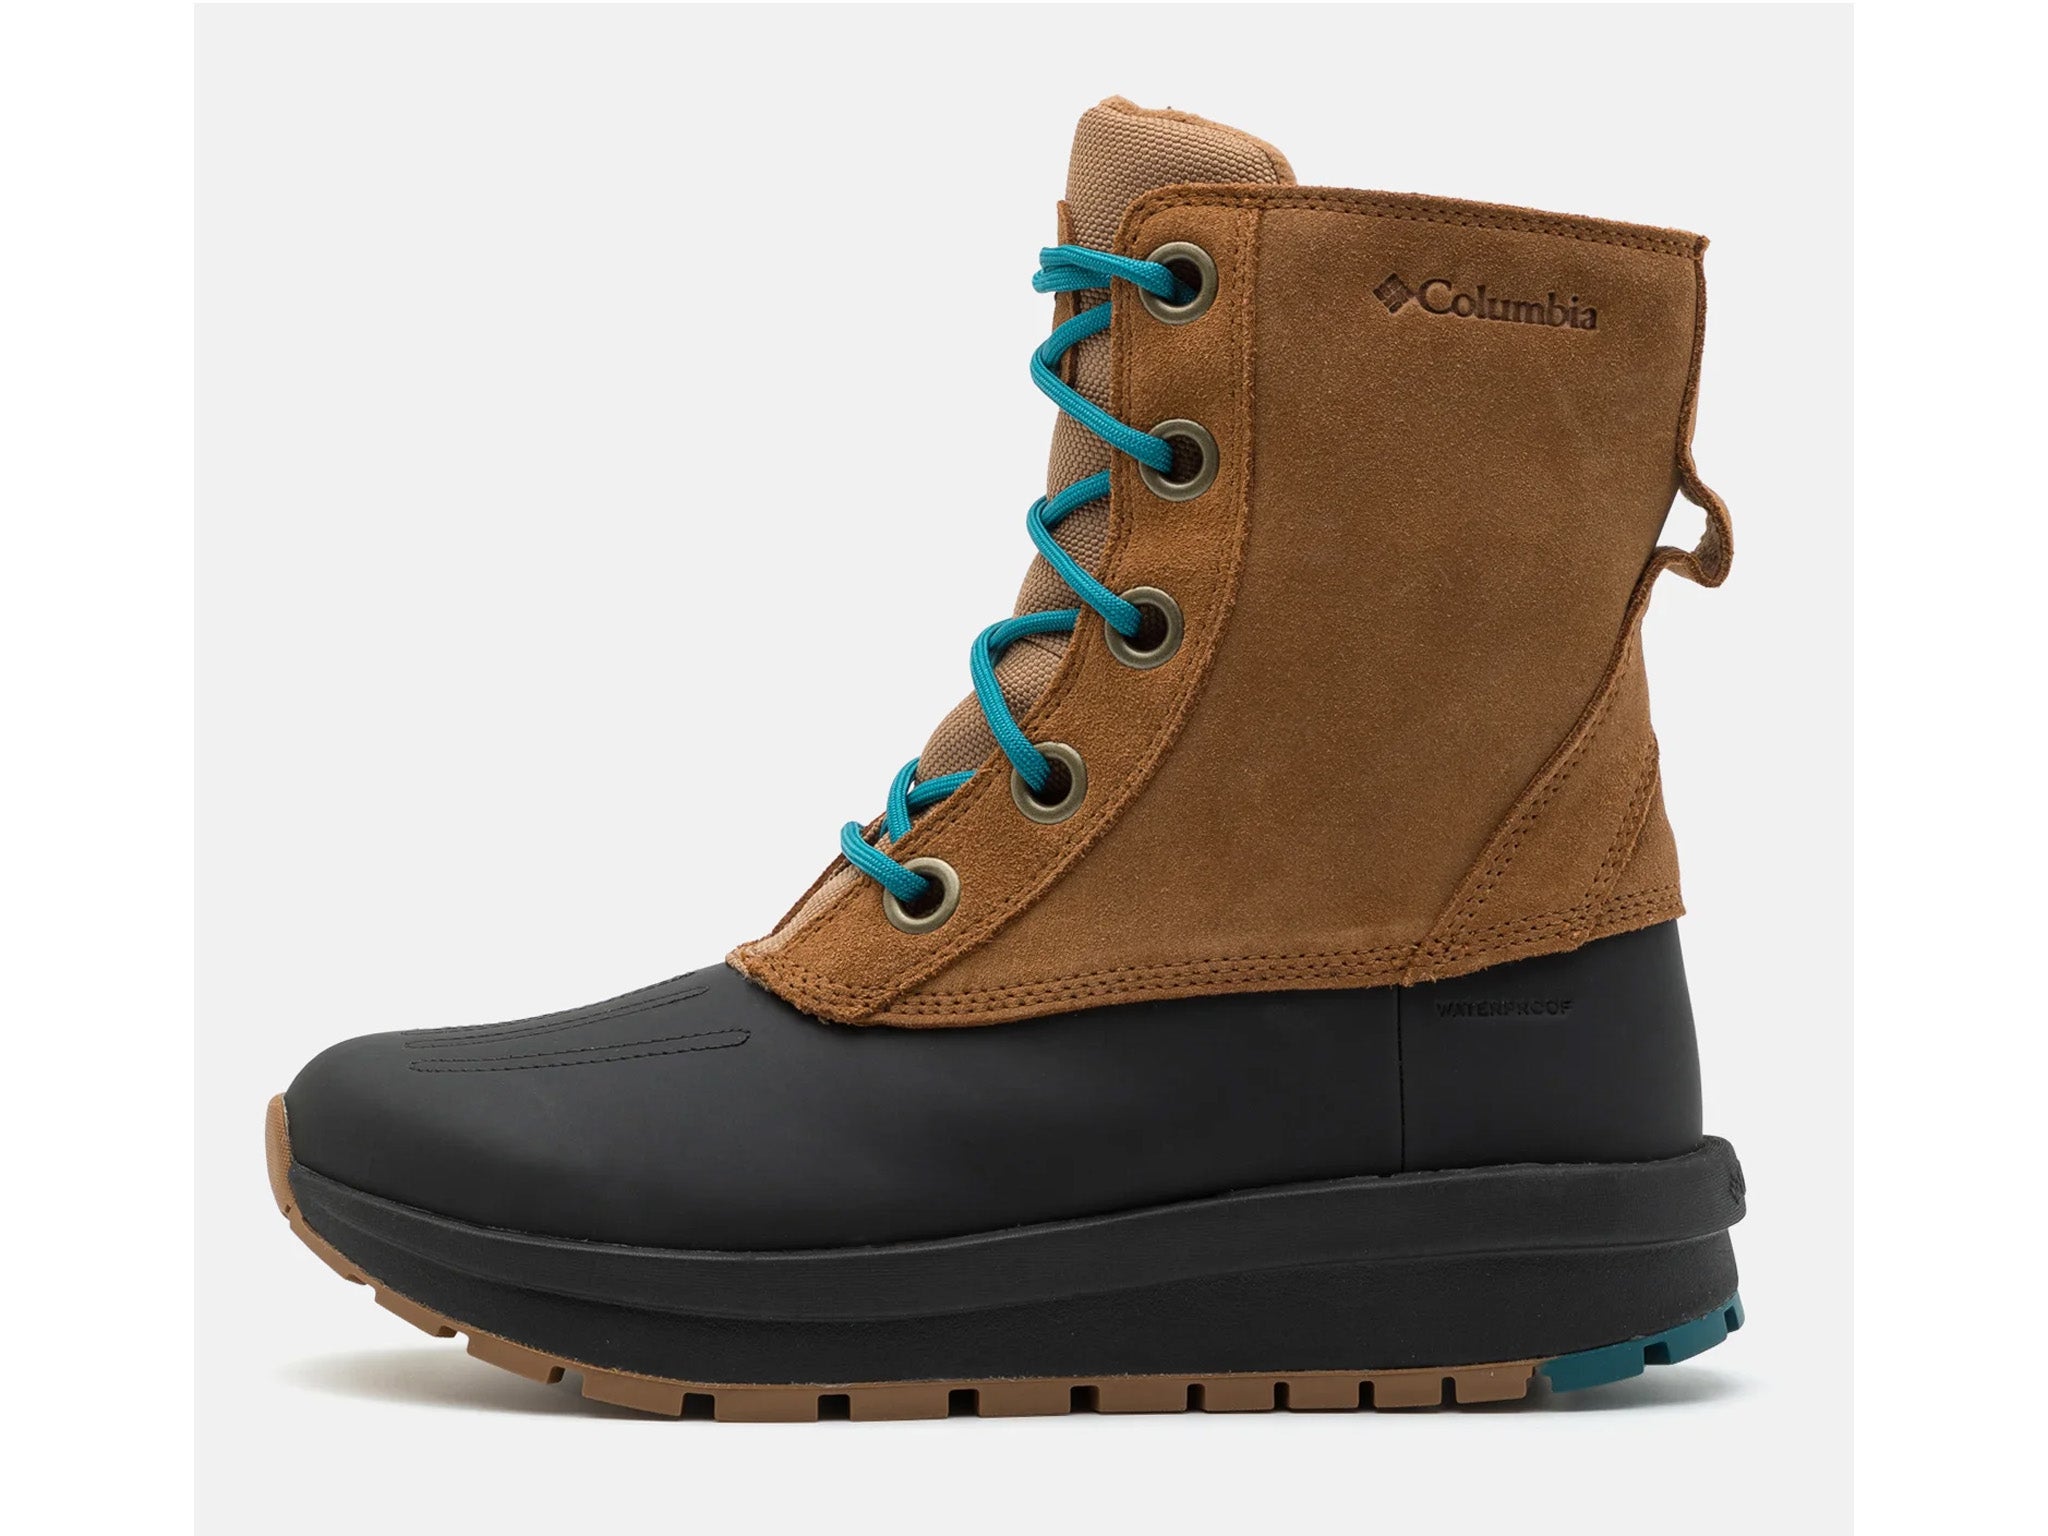 Columbia-Indybest-snowboots-review